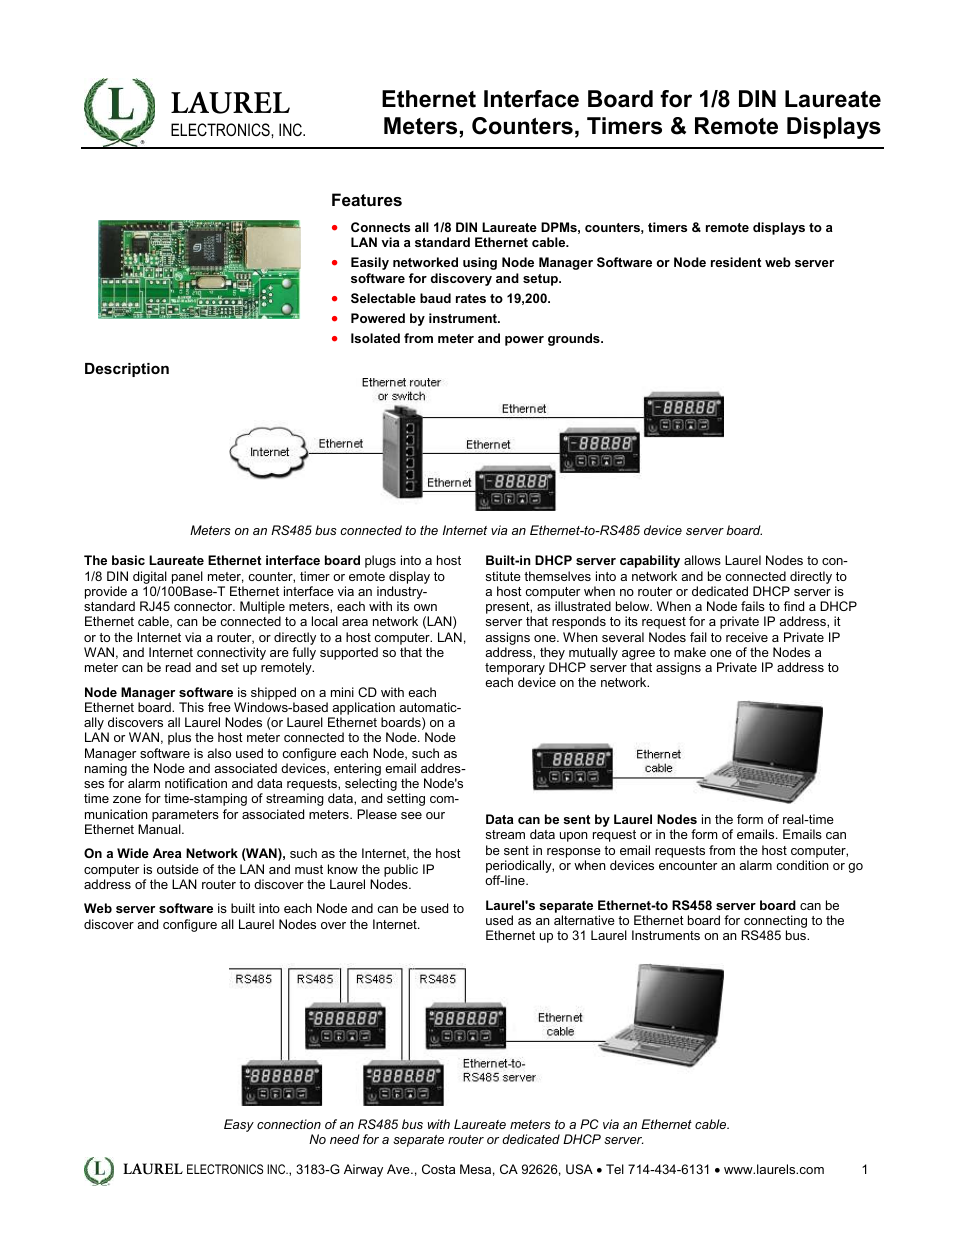 Ethernet Interface Board for 1_8 DIN Laureate Meters, Counters, Timers & Remote Displays